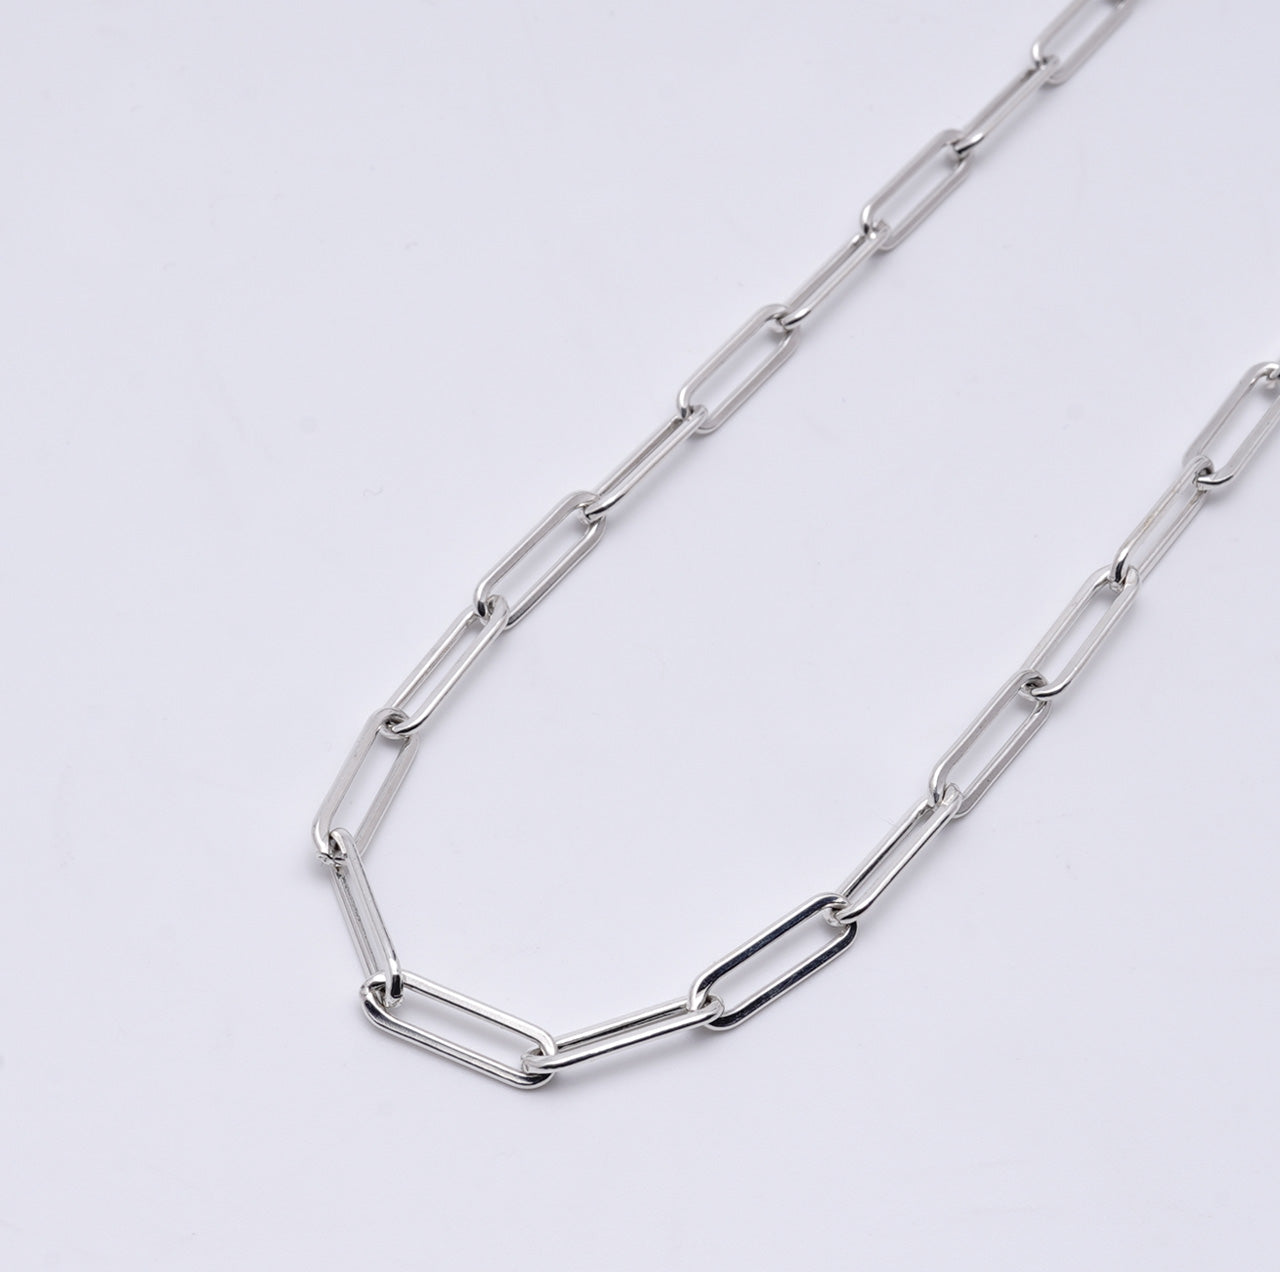 Garden of Eden ガーデンオブエデン チェーン ネックレス アンカー PC CHAIN NECKLACE ANCHOR 40cm 【送料無料】